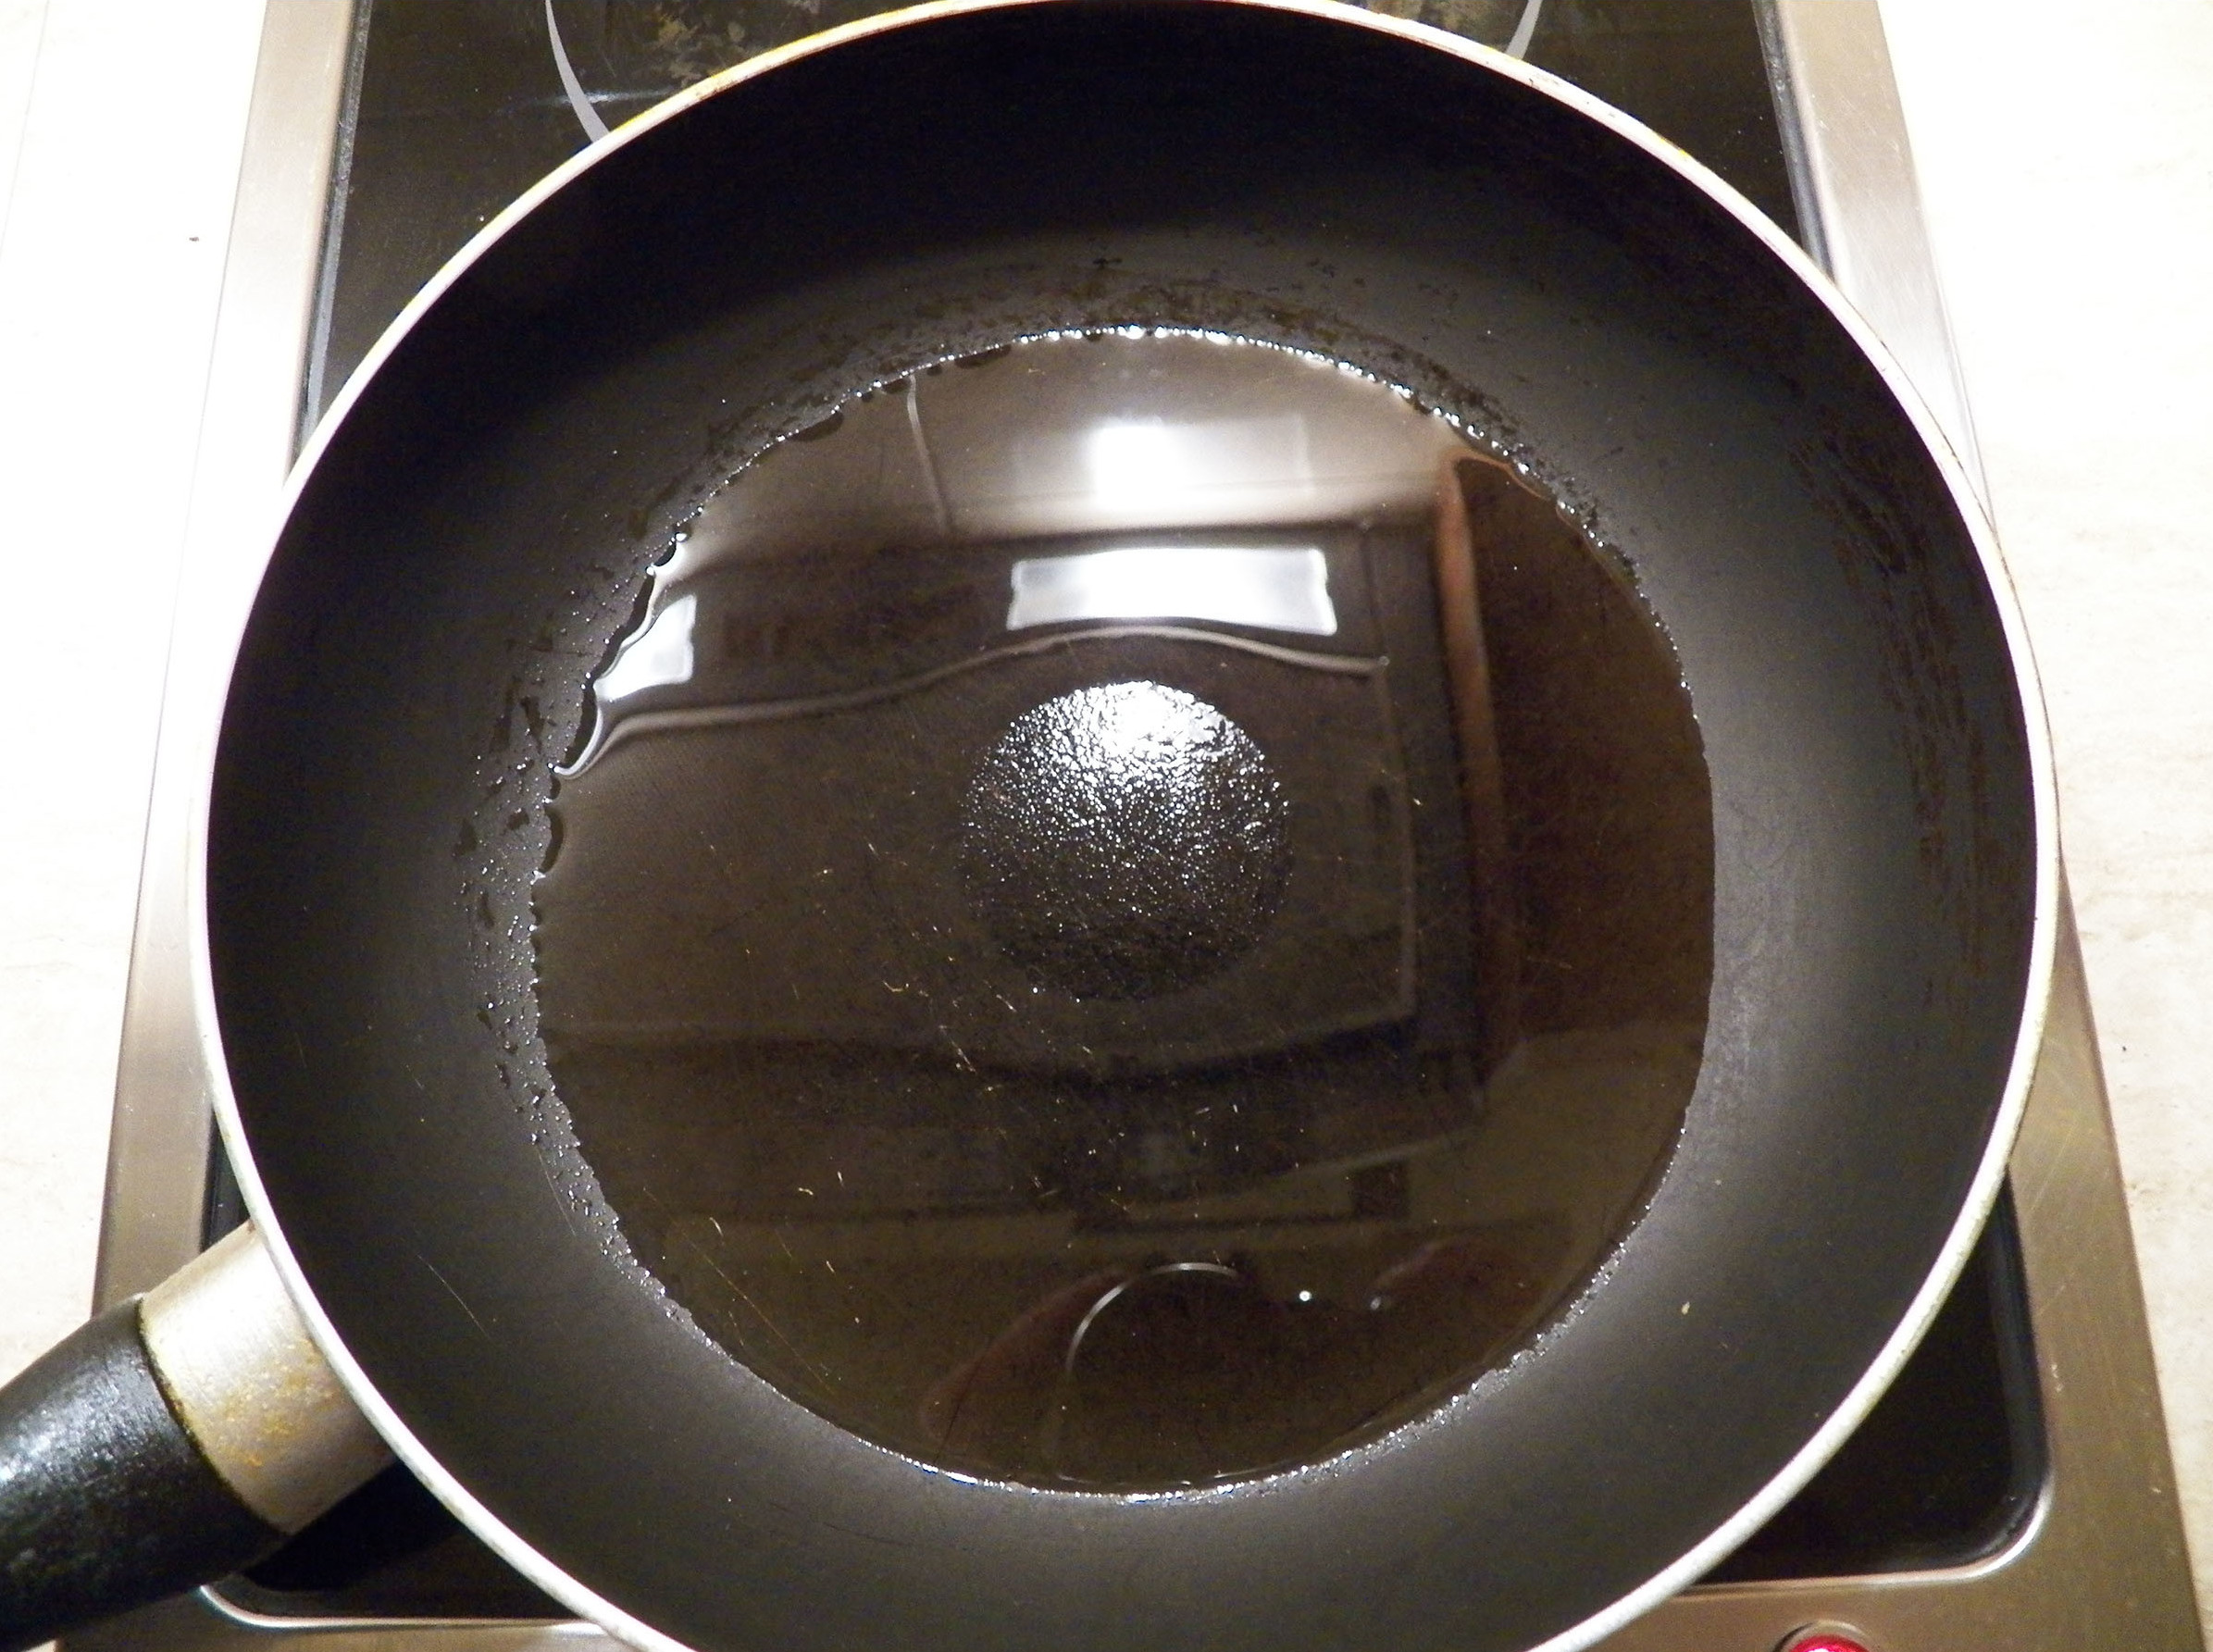 A Teflon pan showing the effect in action.  (Image: Alex Fedorchenko)